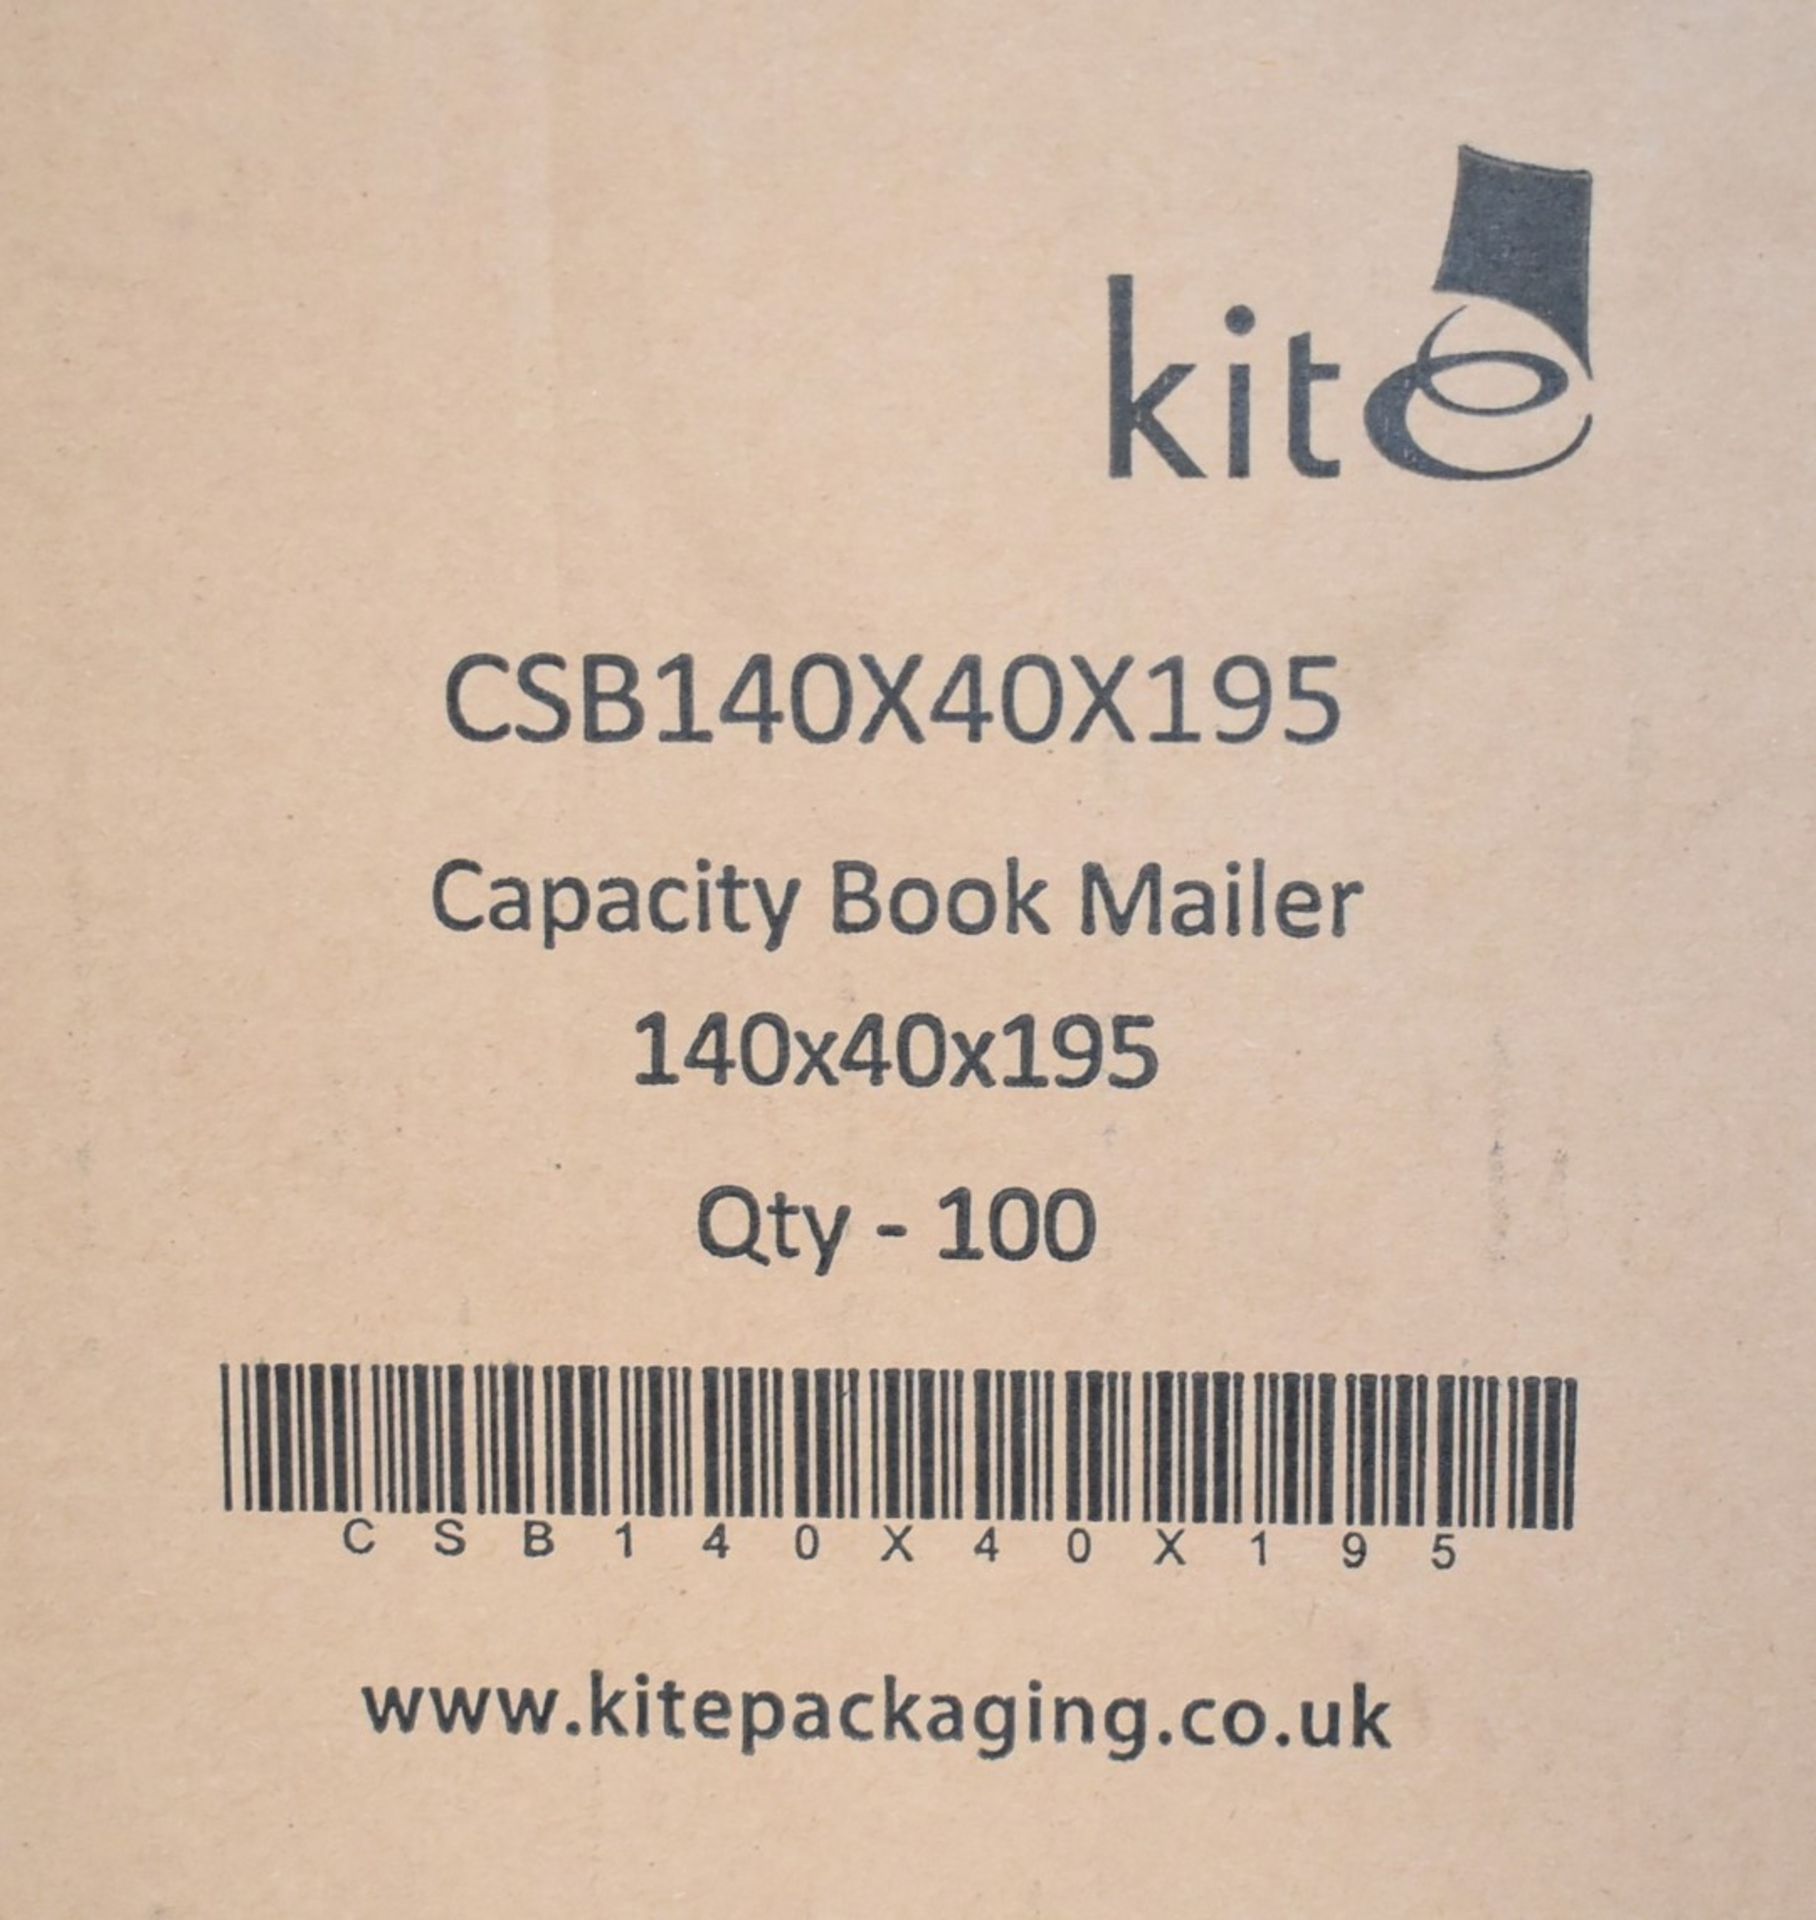 200 x Capacity Book Mailer Cardboard Envelopes - Size: 140 x 140 x 195mm - Includes 2 x Boxes of 100 - Bild 3 aus 6